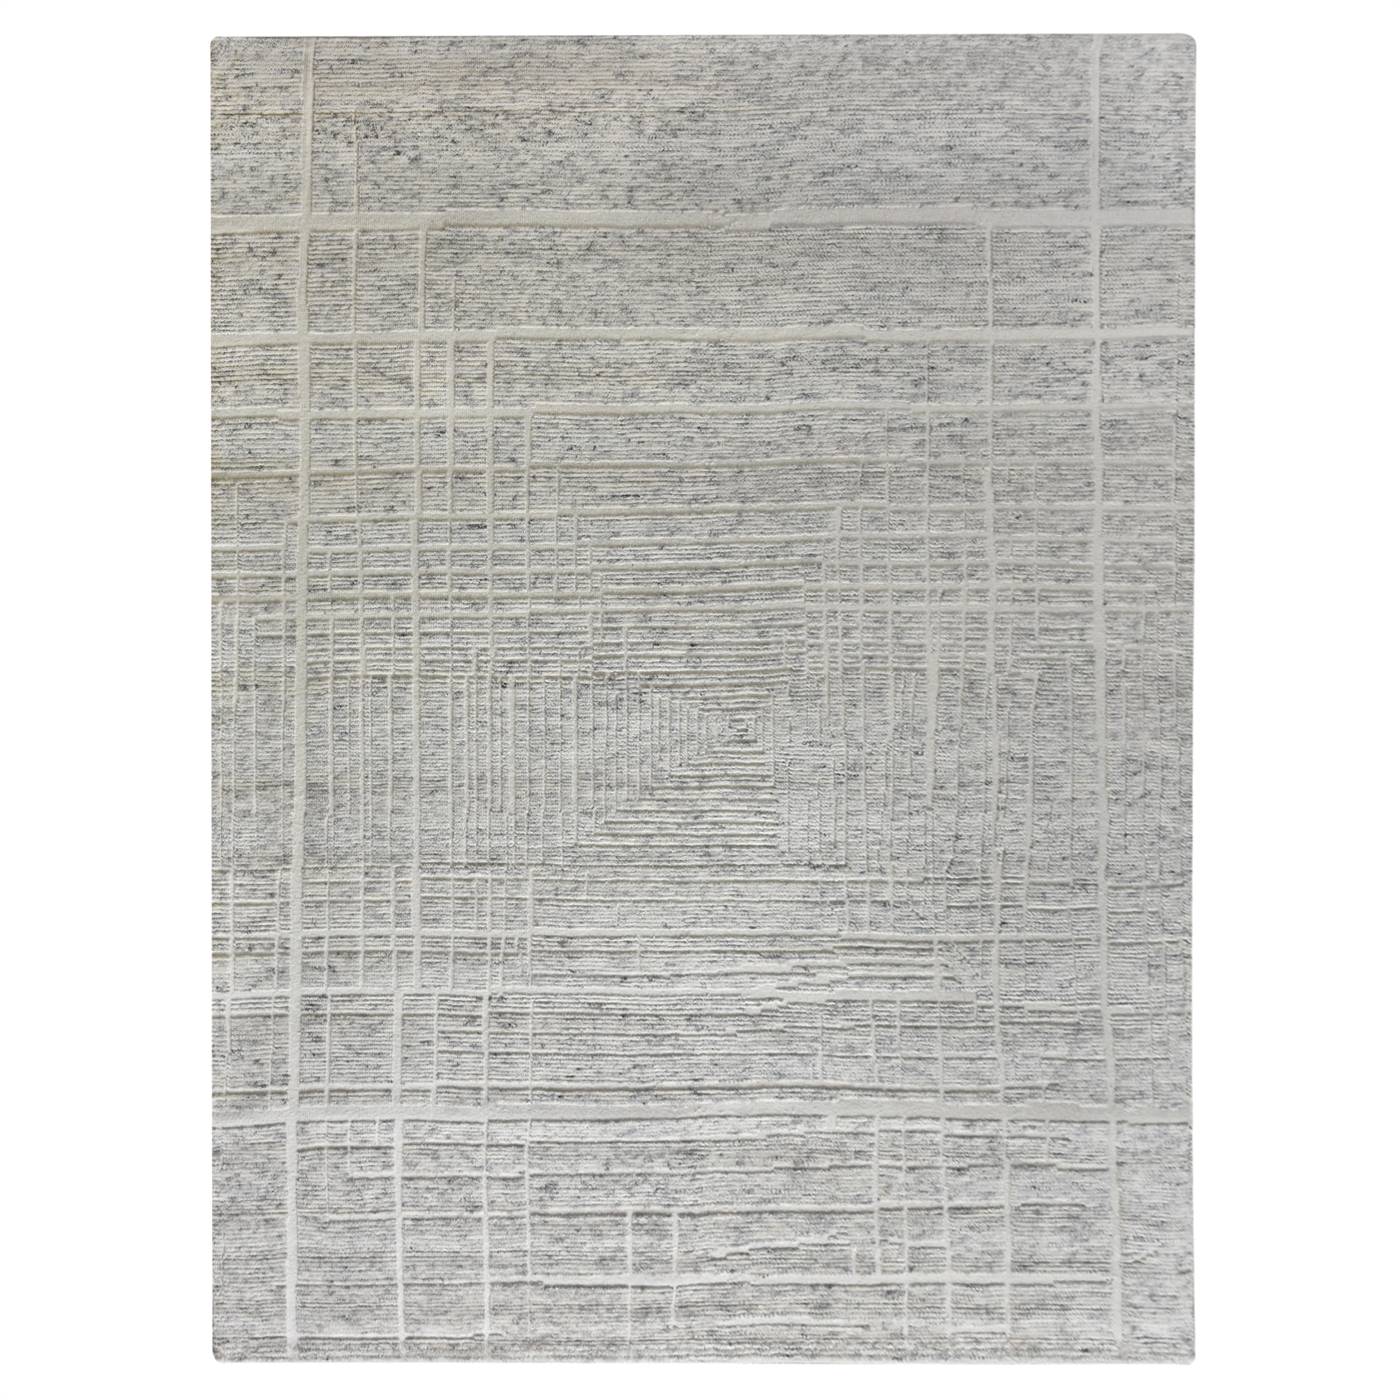 Area Rug, Bedroom Rug, Living Room Rug, Living Area Rug, Indian Rug, Office Carpet, Office Rug, Shop Rug Online, Natural White, Wool Viscose Blend , Hand Knotted , Handknotted, All Cut, Intricate 